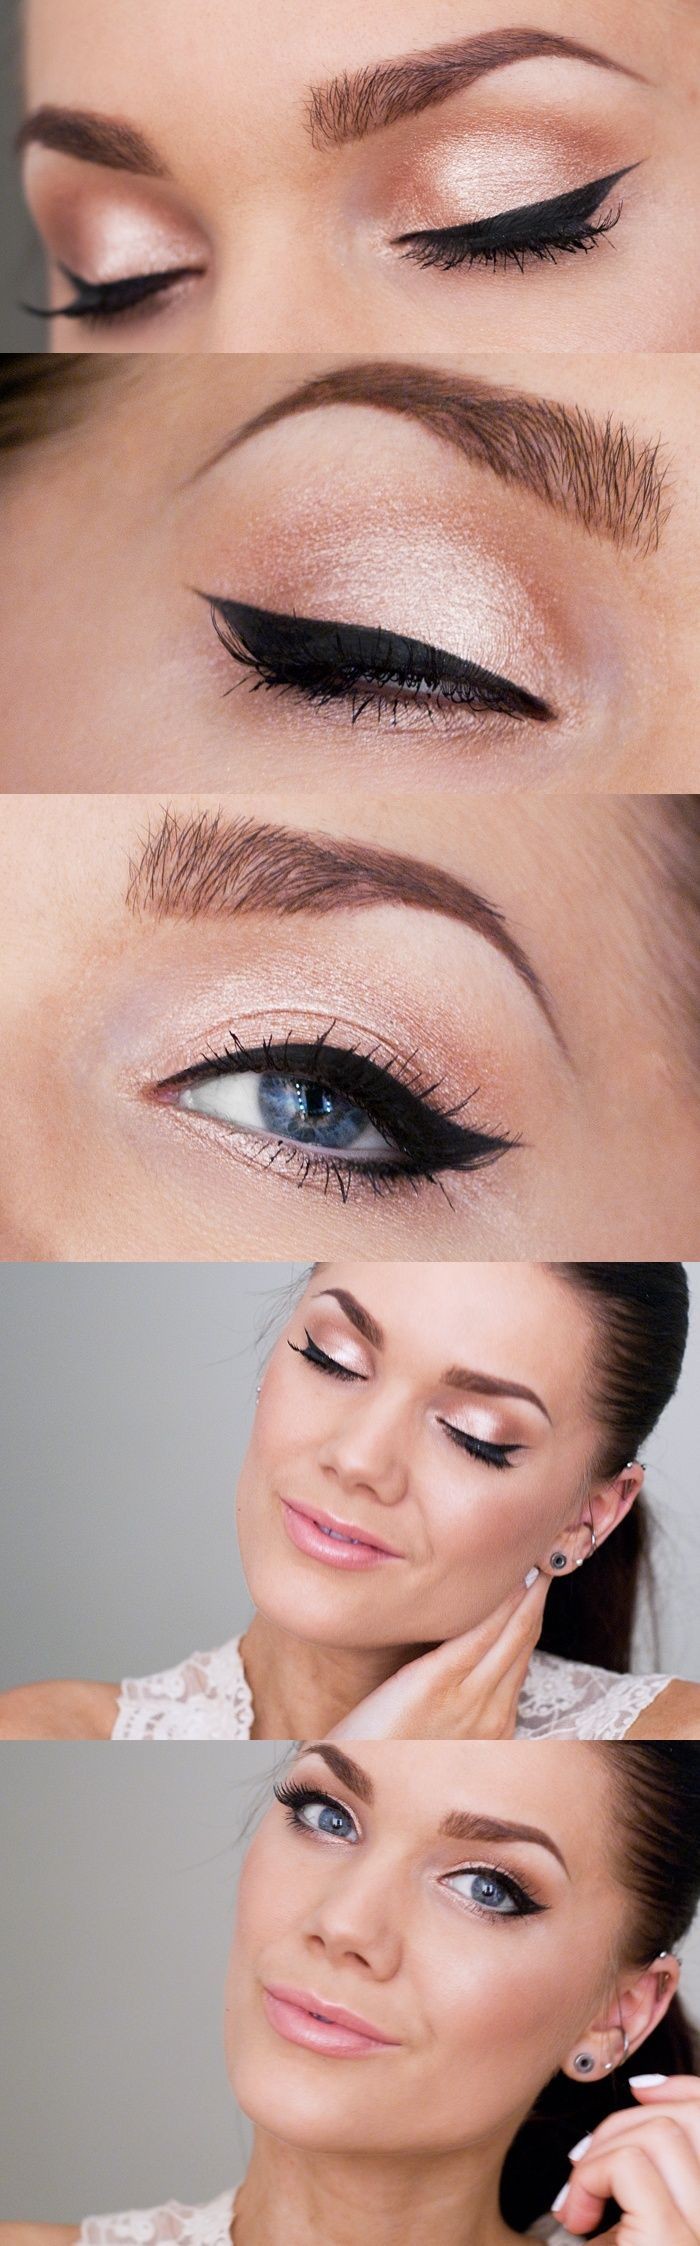 27 Beauty Hacks Everyone Should Know!! Check out t...